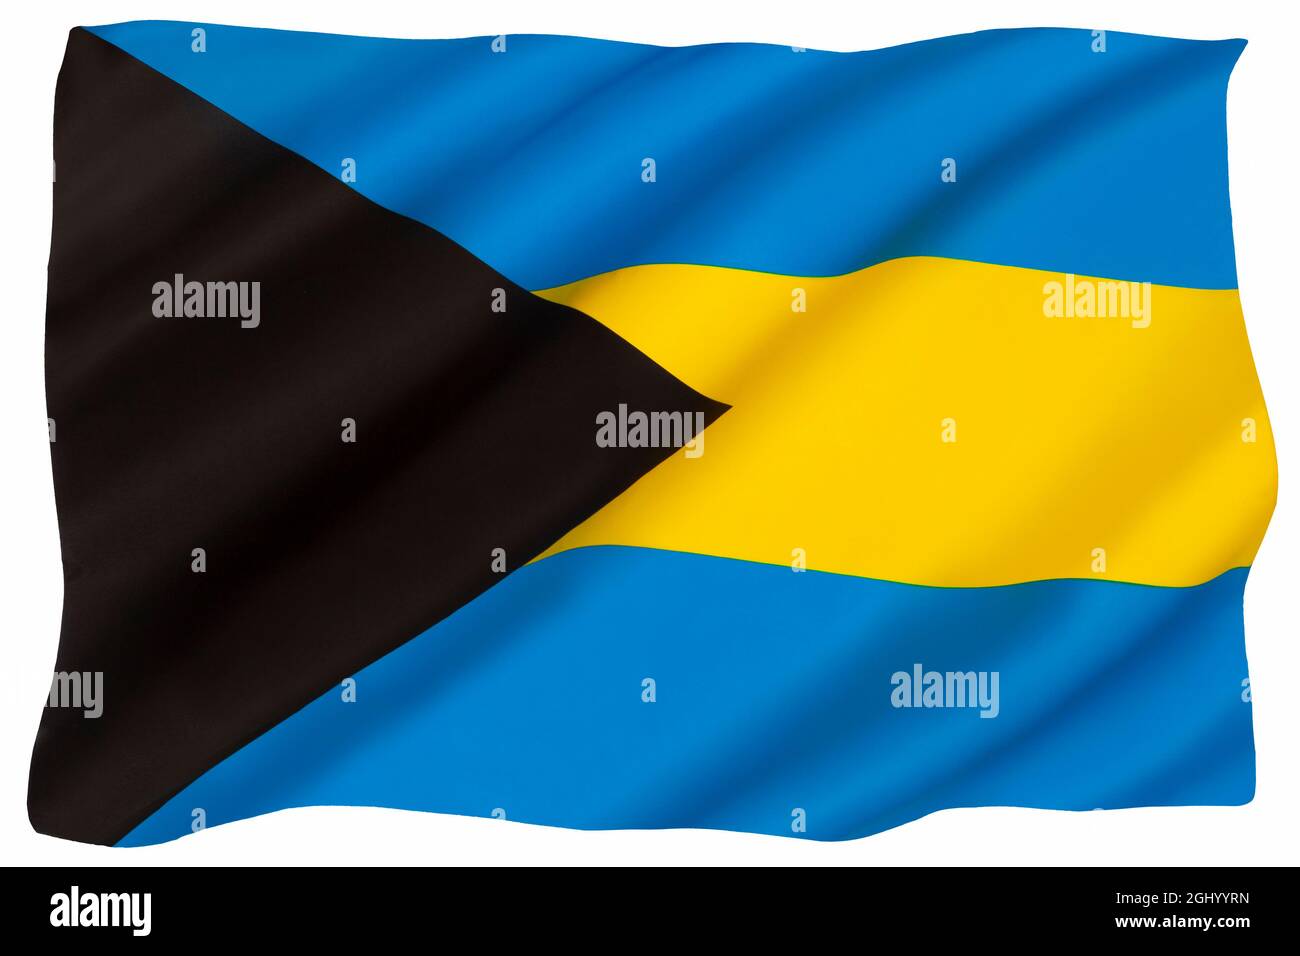 The national flag of the Bahamas - adopted in 1973. Isolated on a white background for cut out. Stock Photo